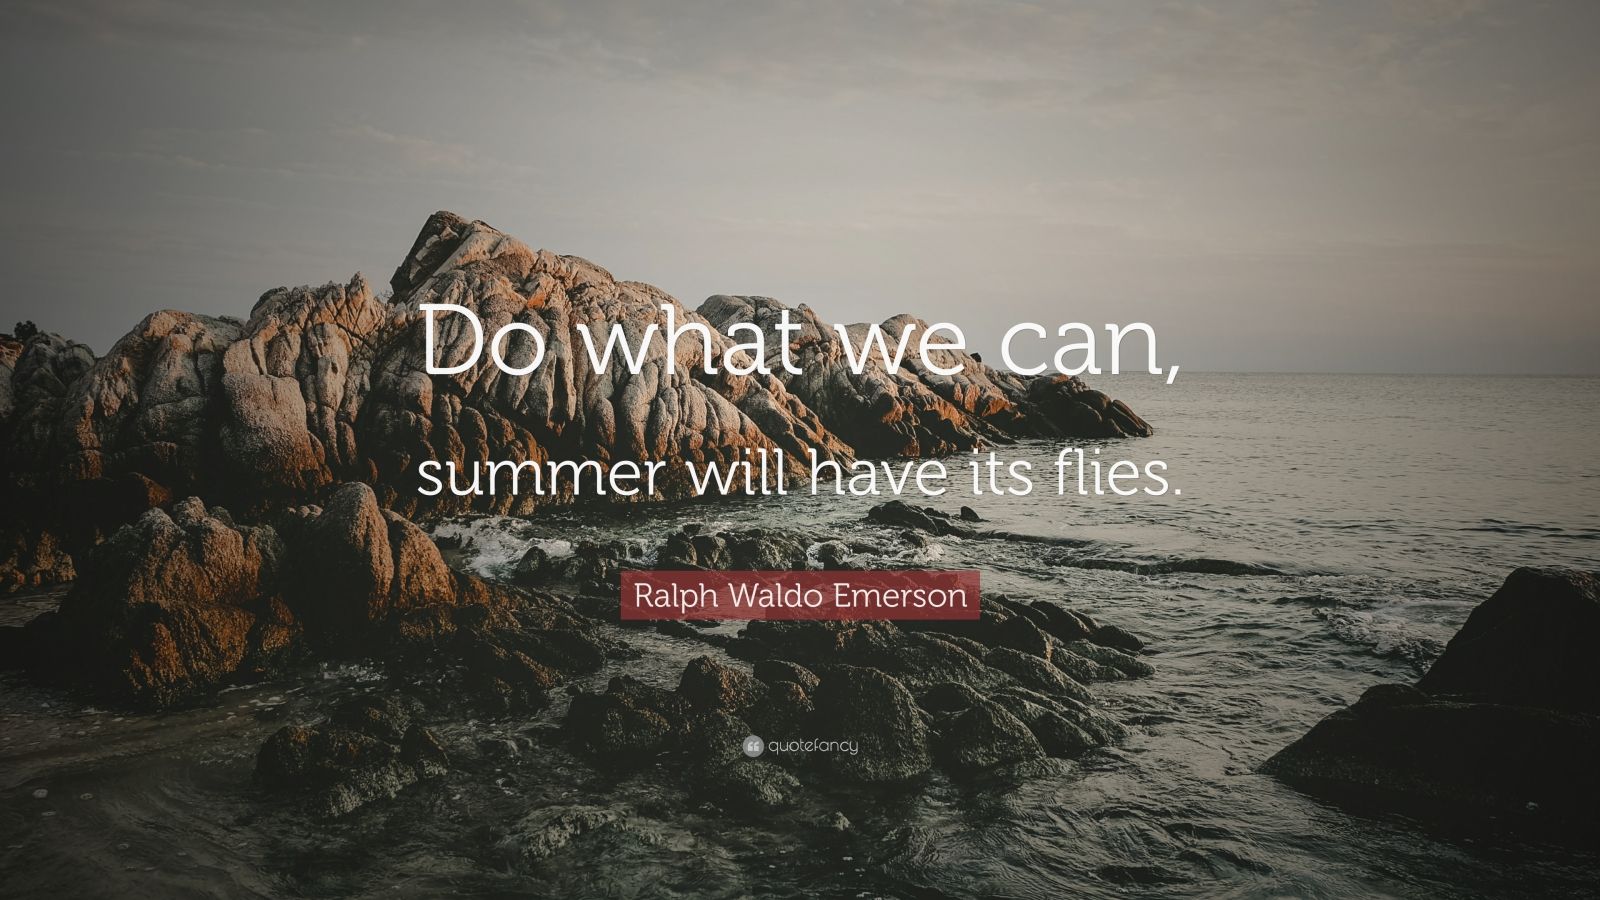 Download Ralph Waldo Emerson Quote: "Do what we can, summer will ...